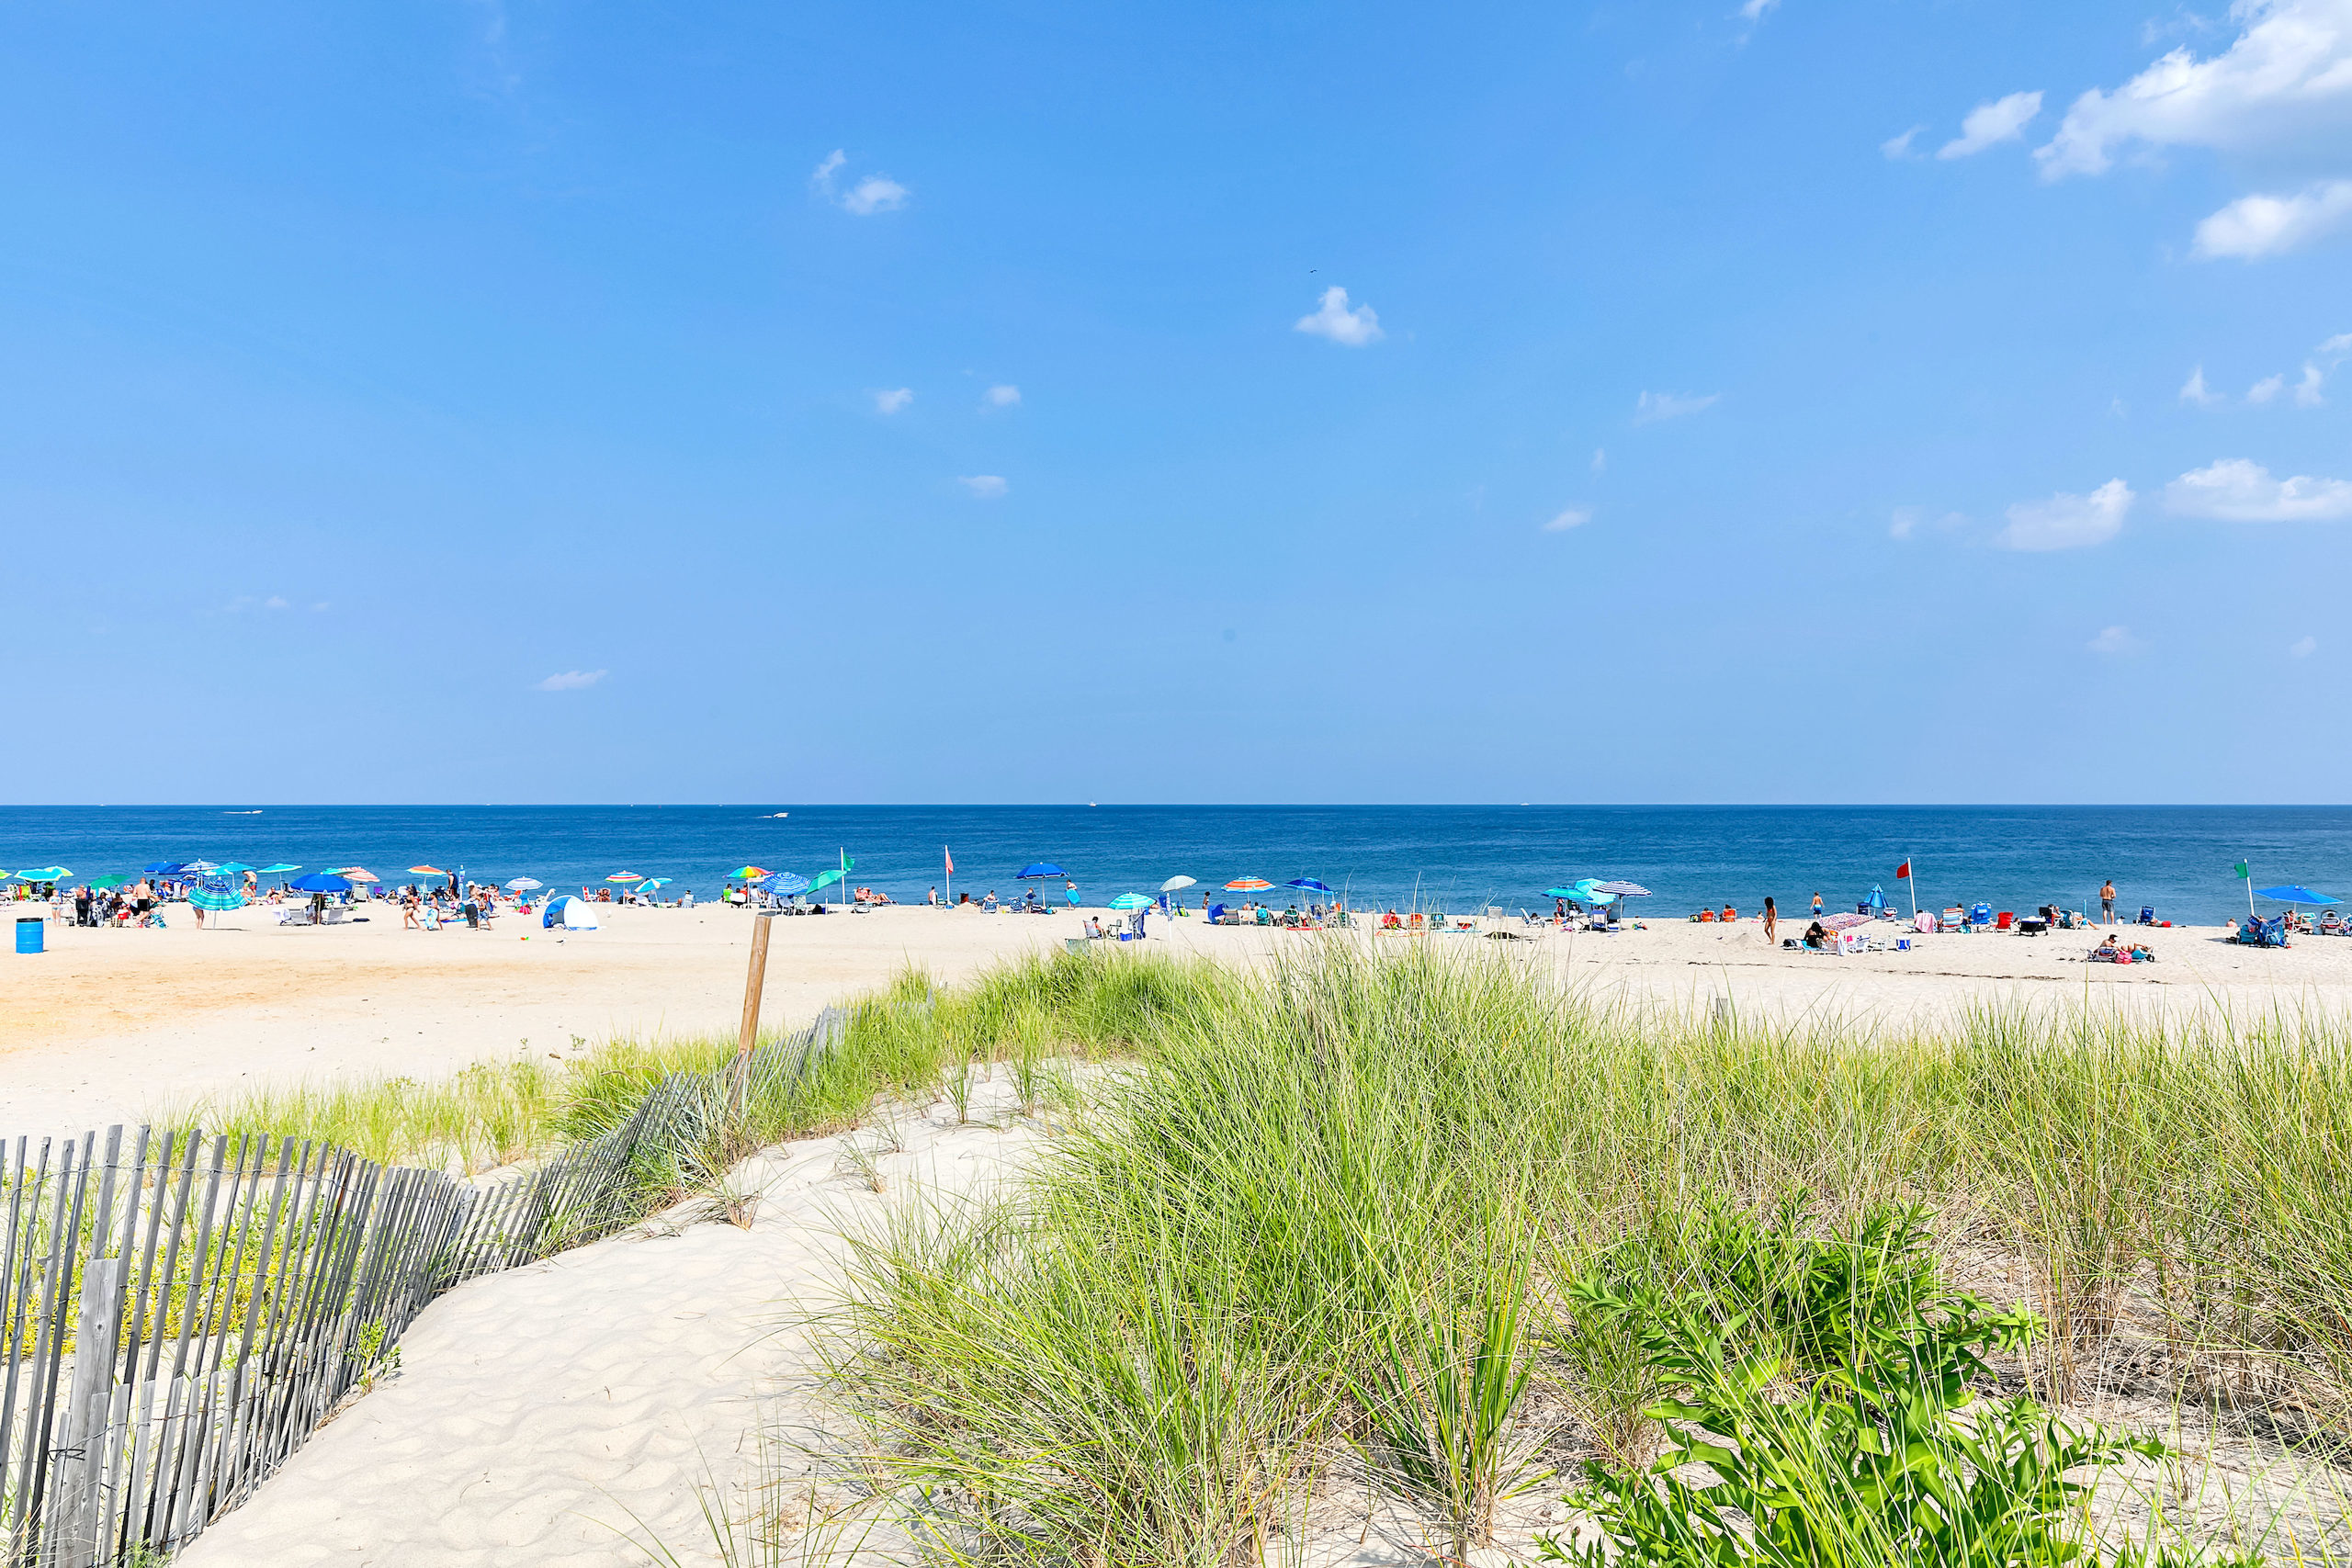 View of beach on the eastern side of Manasquan real estate